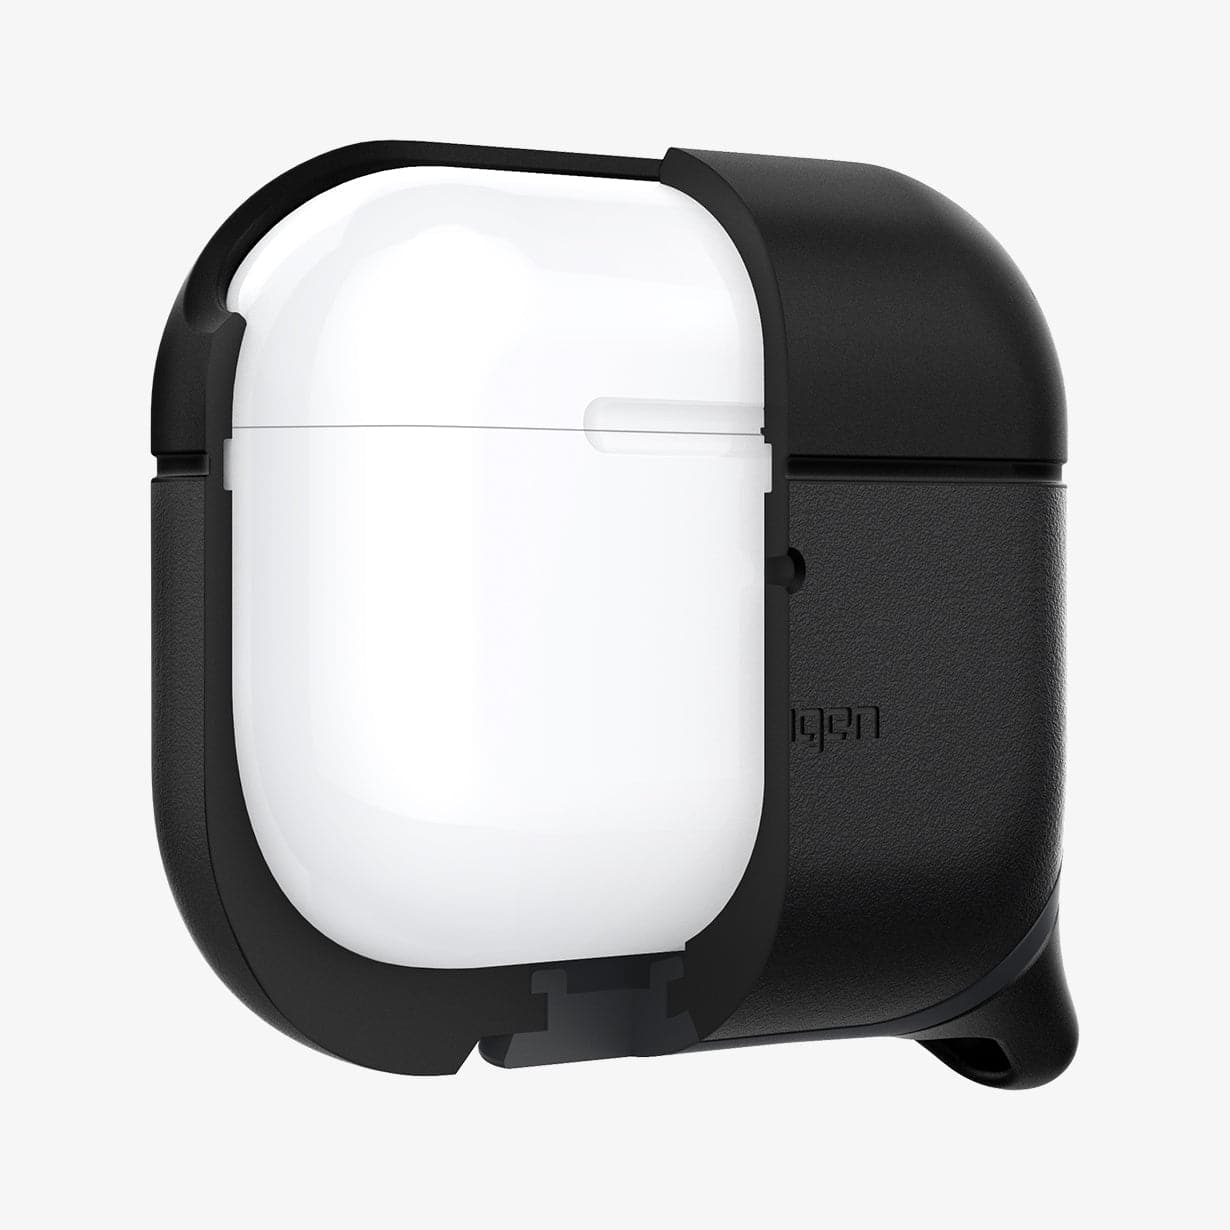 ASD00542 - Apple AirPods Pro / AirPods Pro 2 Case Slim Armor IP in black showing the front with case cut half open